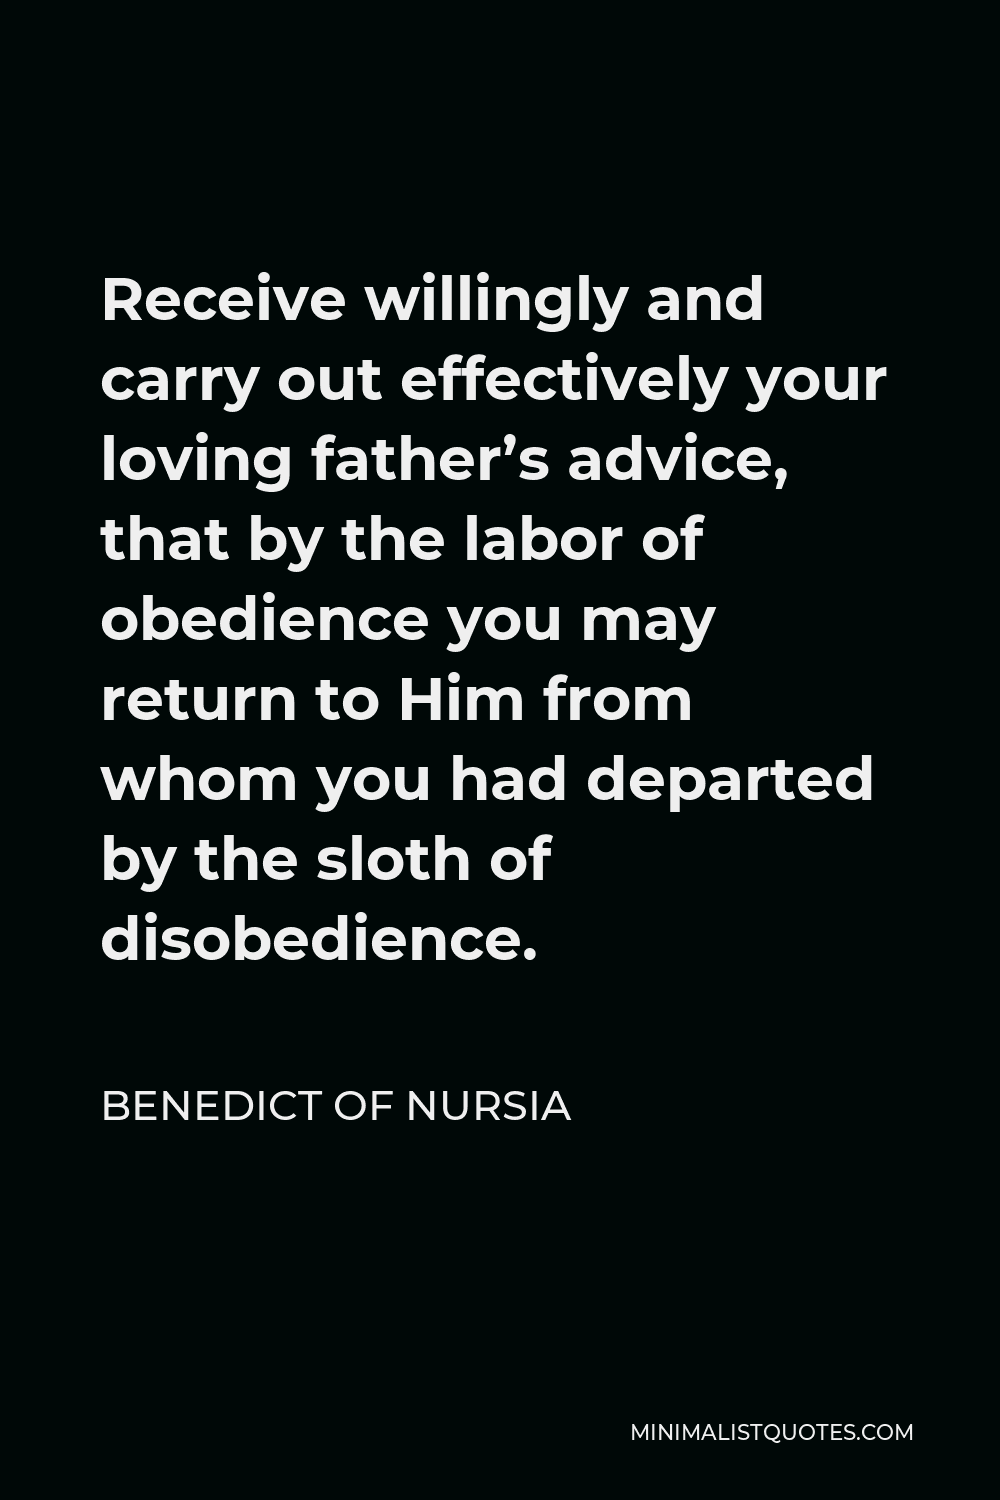 Benedict of Nursia Quote - Receive willingly and carry out effectively your loving father’s advice, that by the labor of obedience you may return to Him from whom you had departed by the sloth of disobedience.